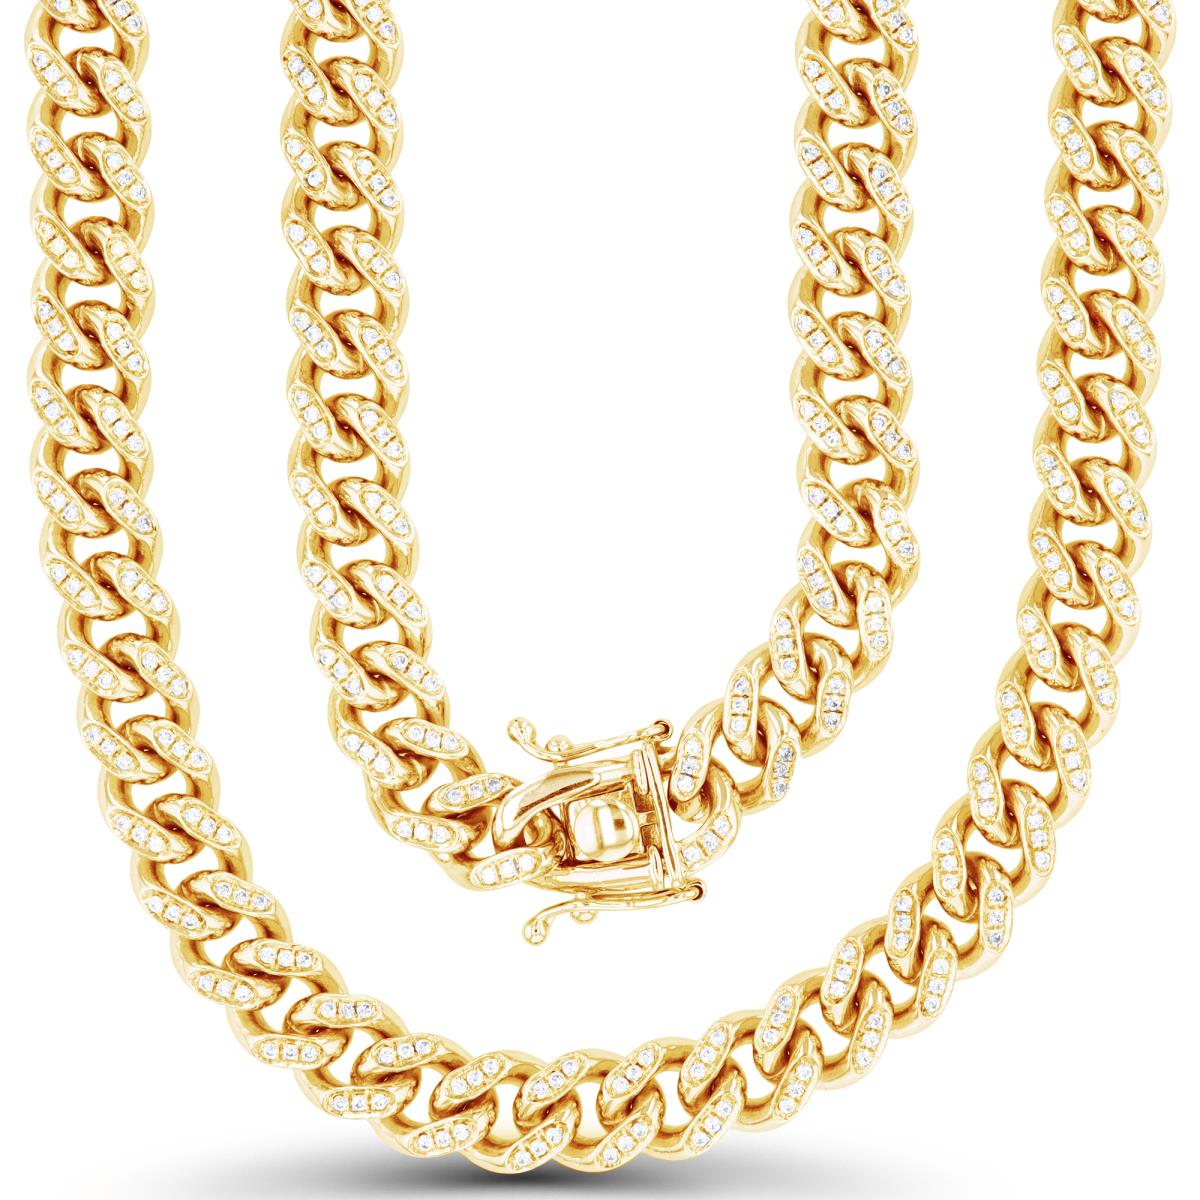 14K Yellow Gold 2.82CTTW Diamond Pave 6mm Solid Miami Cuban 180 26" Chain